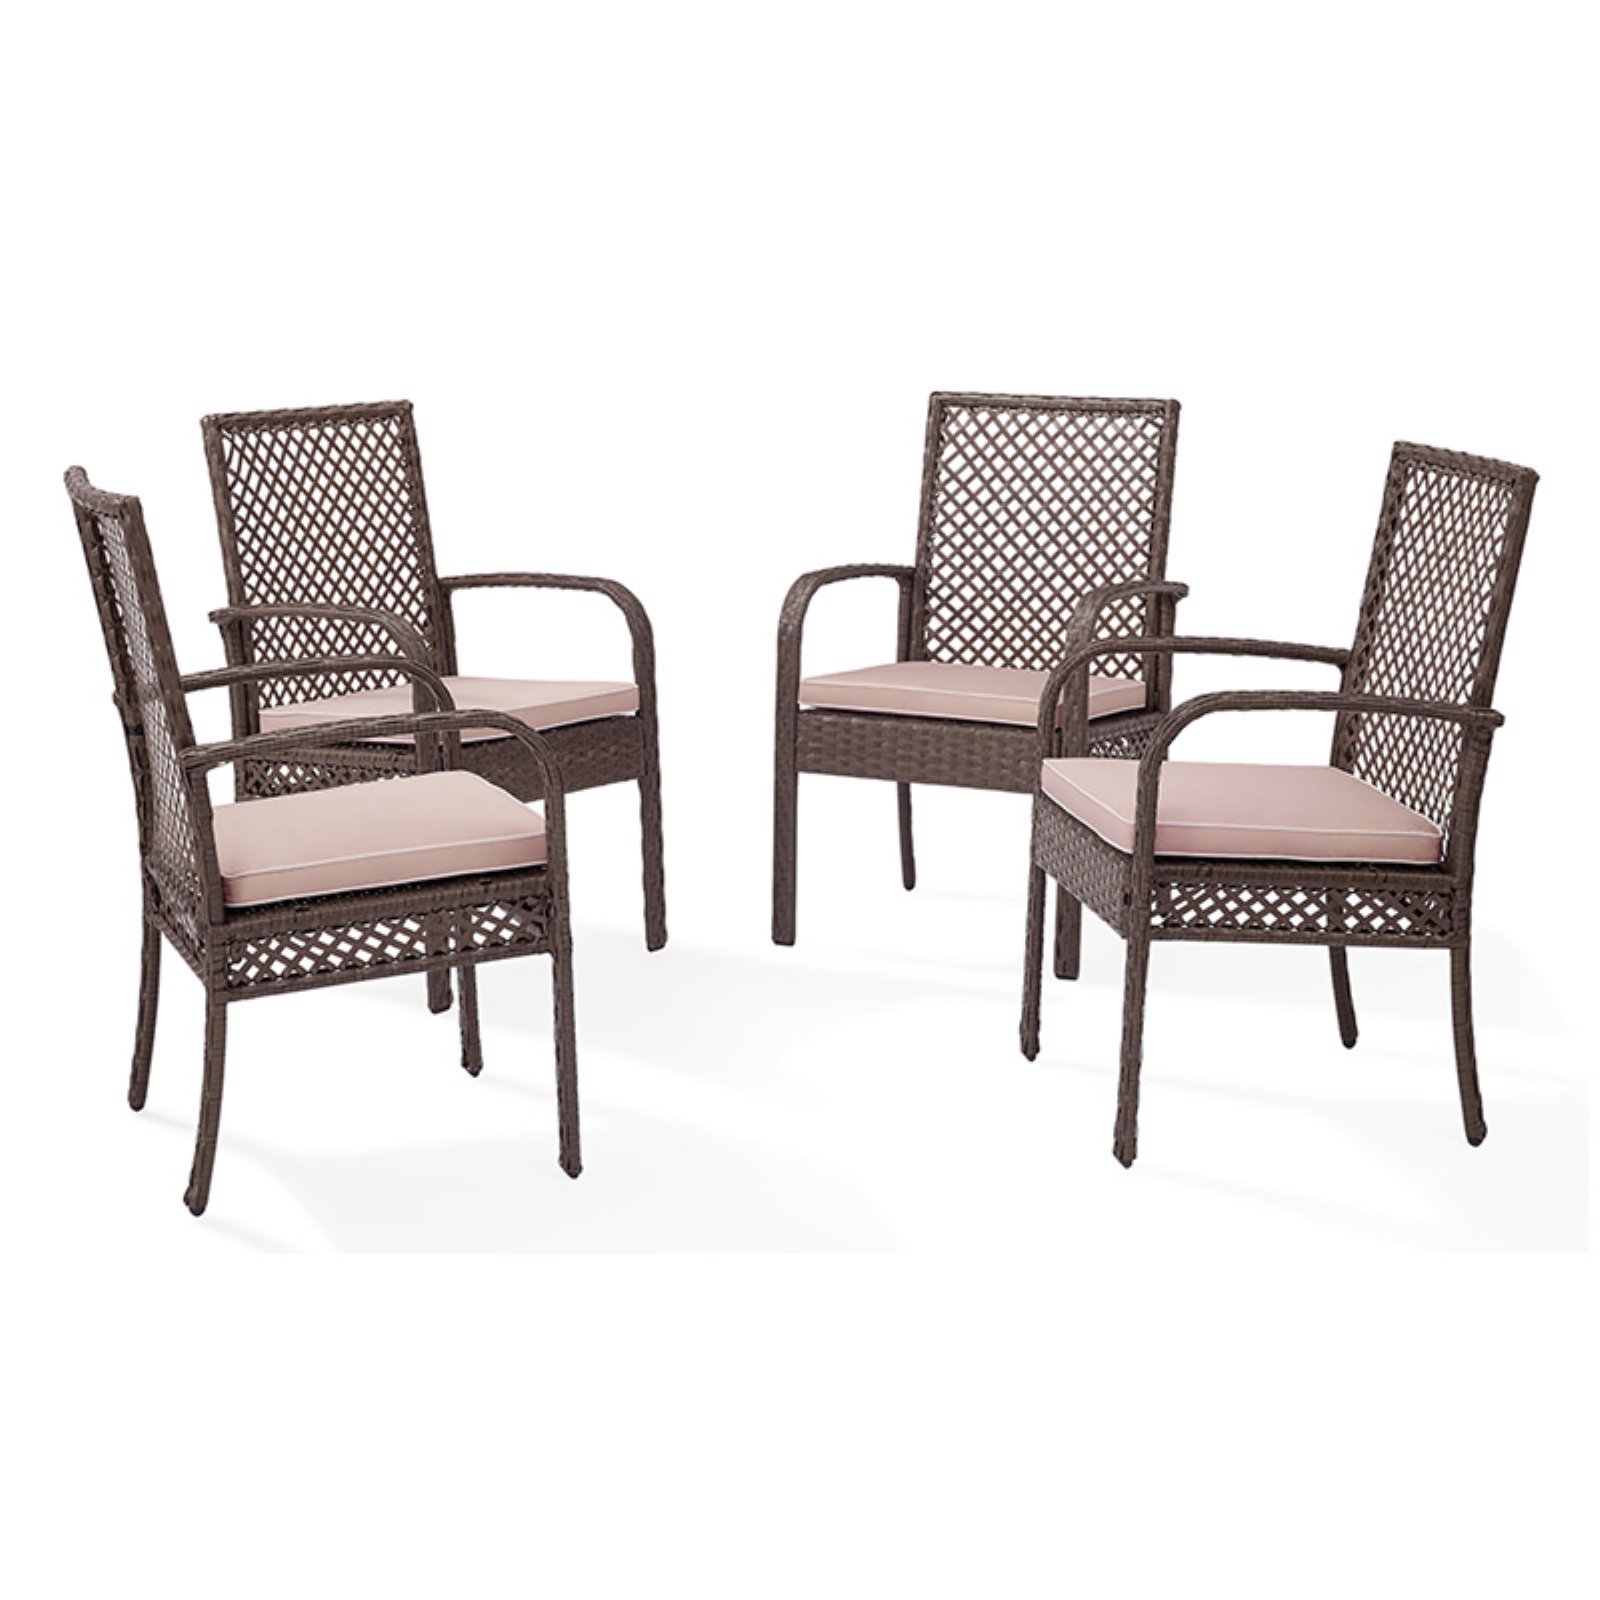 Crosley Furniture Tribeca Wicker Patio Dining Arm Chair in Driftwood - image 4 of 6